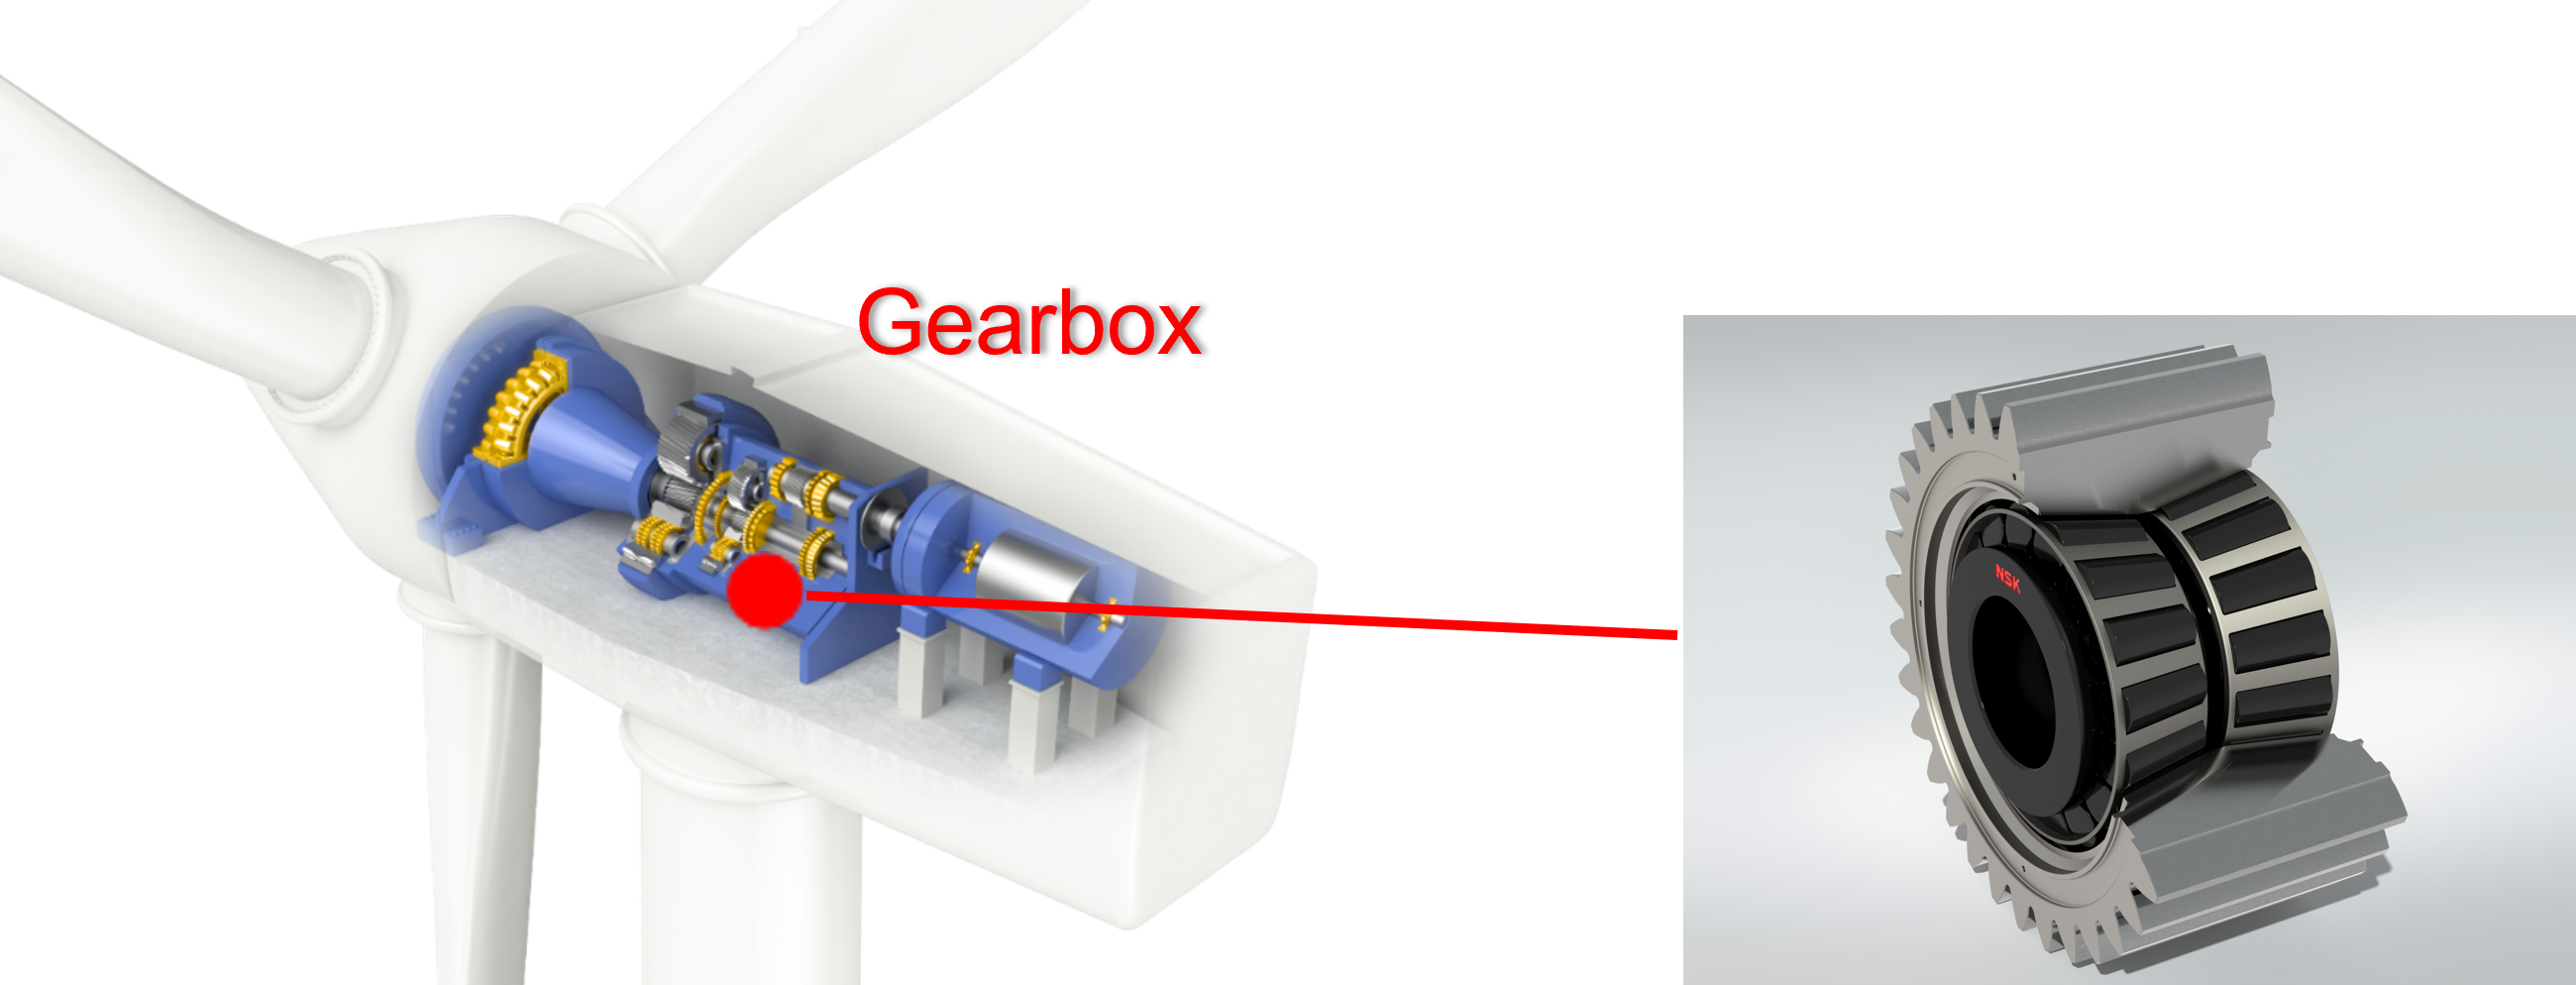 1_Gearbox of a Wind Turbine and Newly Developed Product 